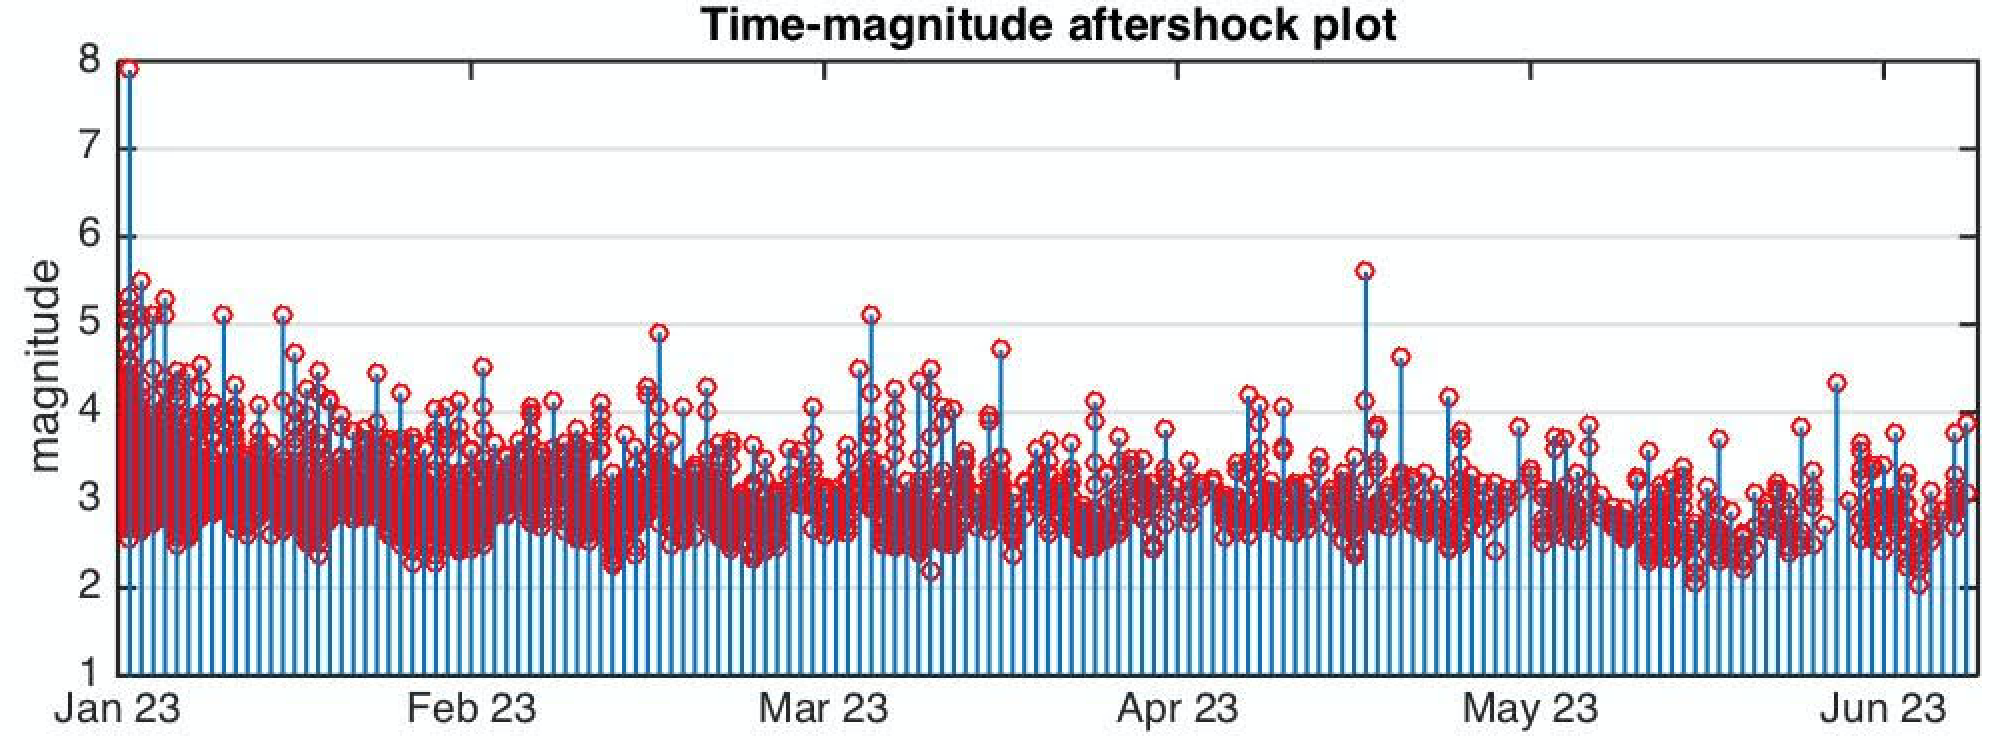 Larger aftershocks have become less frequent, but a significant aftershock is still possible.